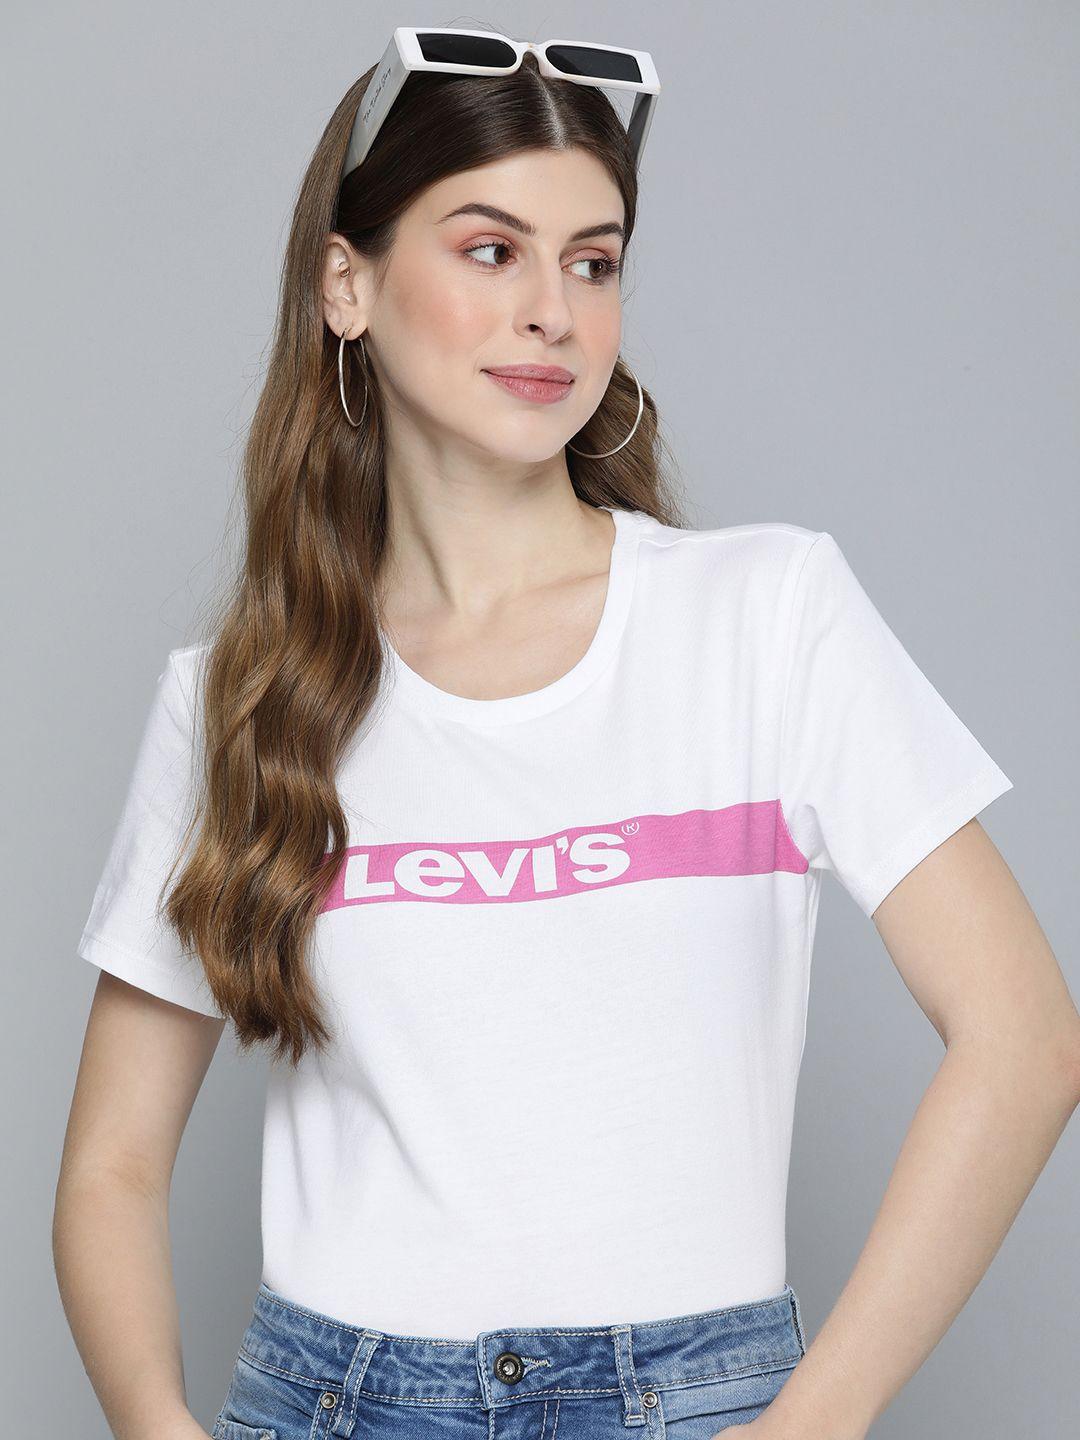 levis-pure-cotton-brand-logo-printed-casual-t-shirt